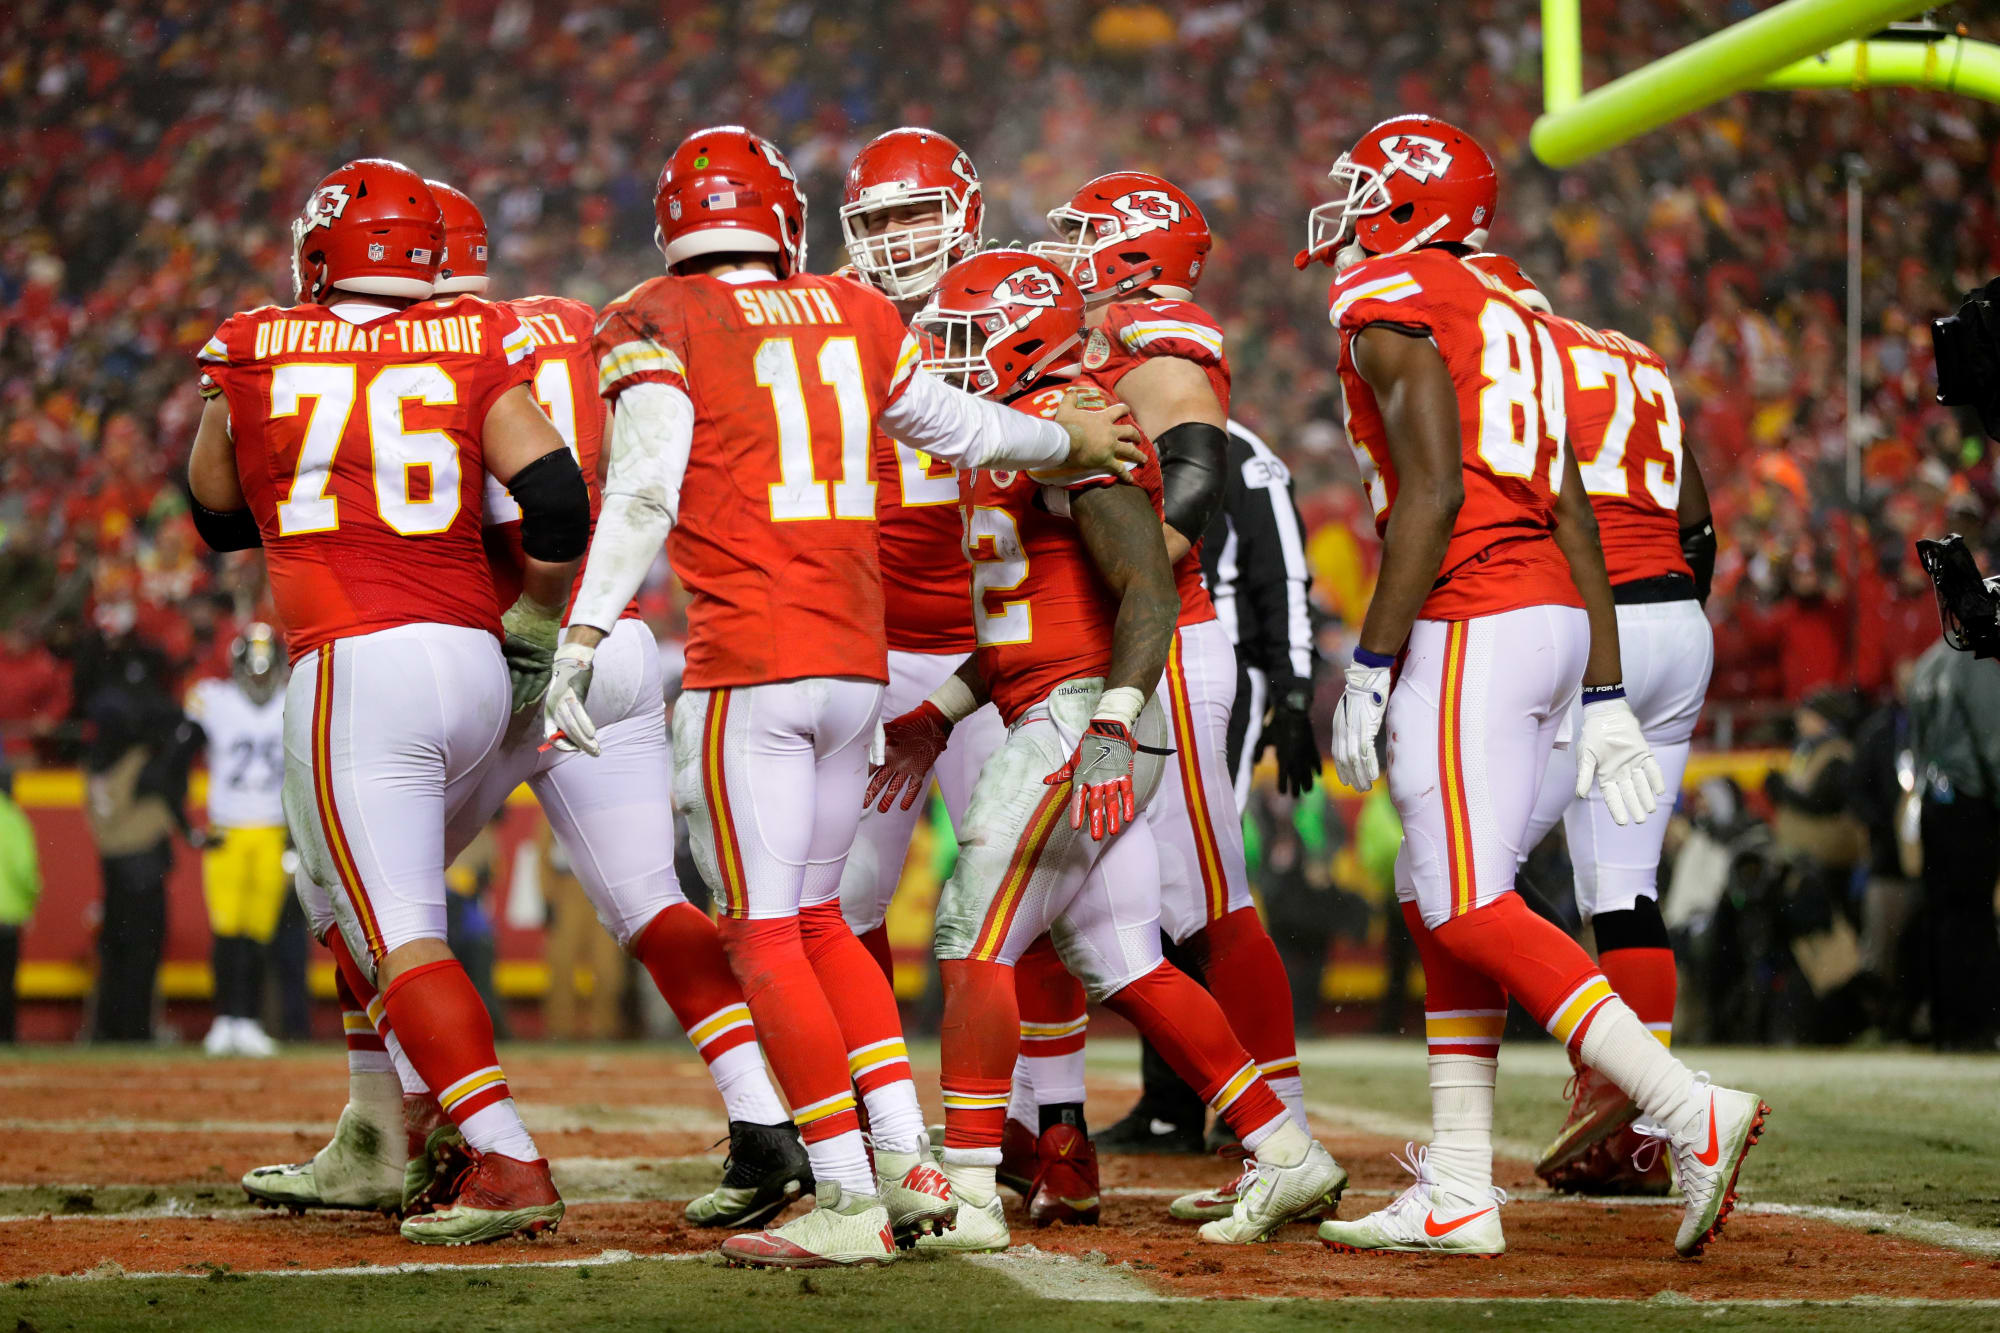 Kansas City Chiefs 53-man roster: Where have they improved? - Page 2